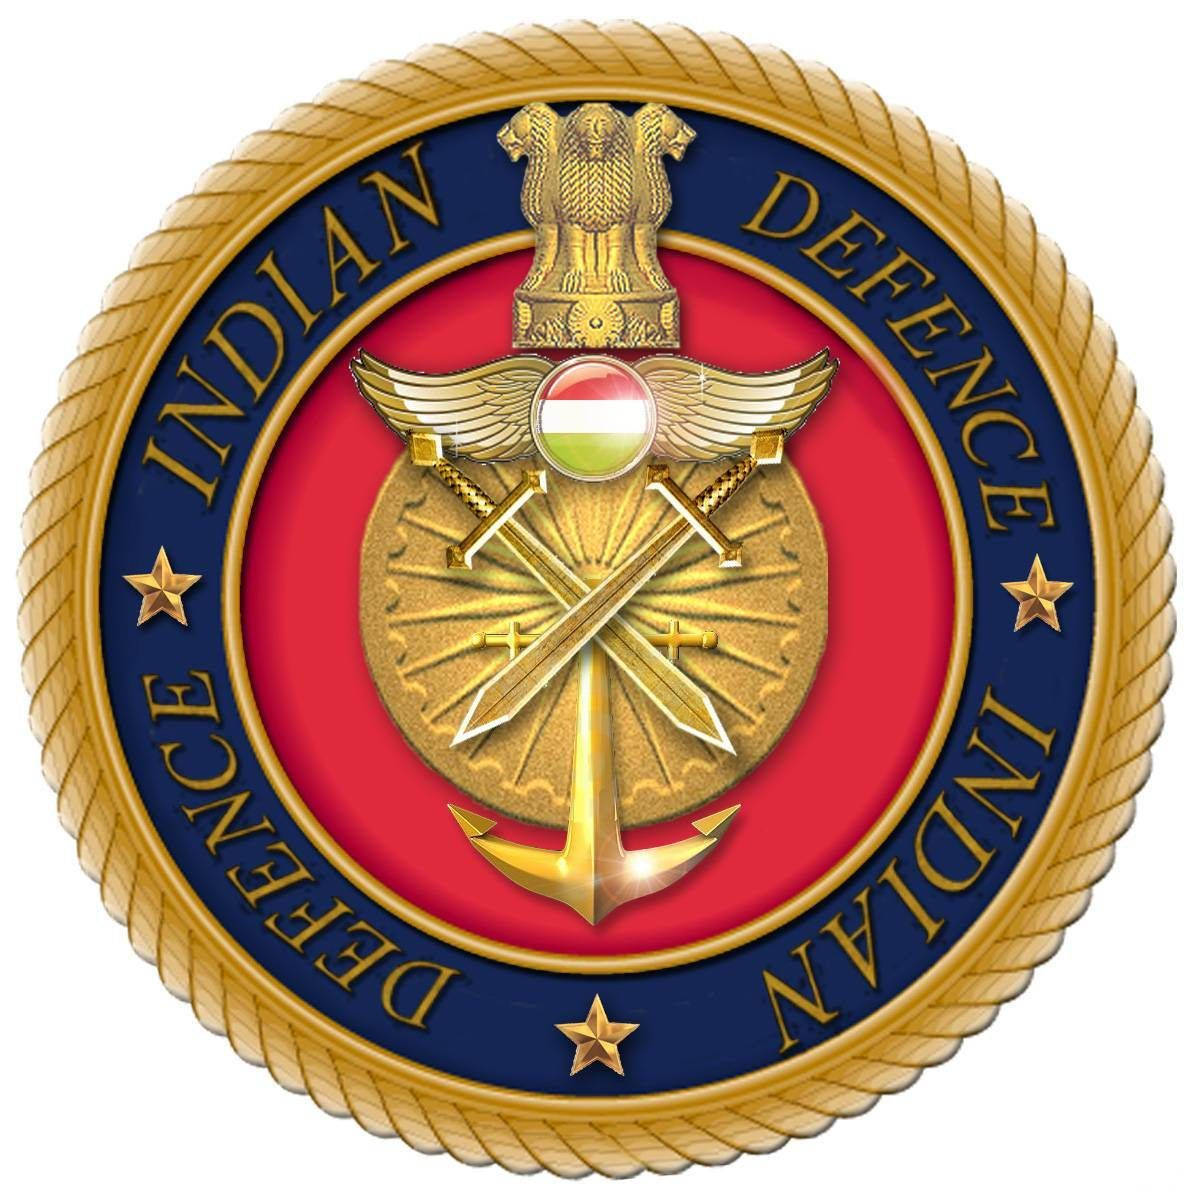 Captivating Power: Indian Army Logo Featuring Two Swords And Anchor Background